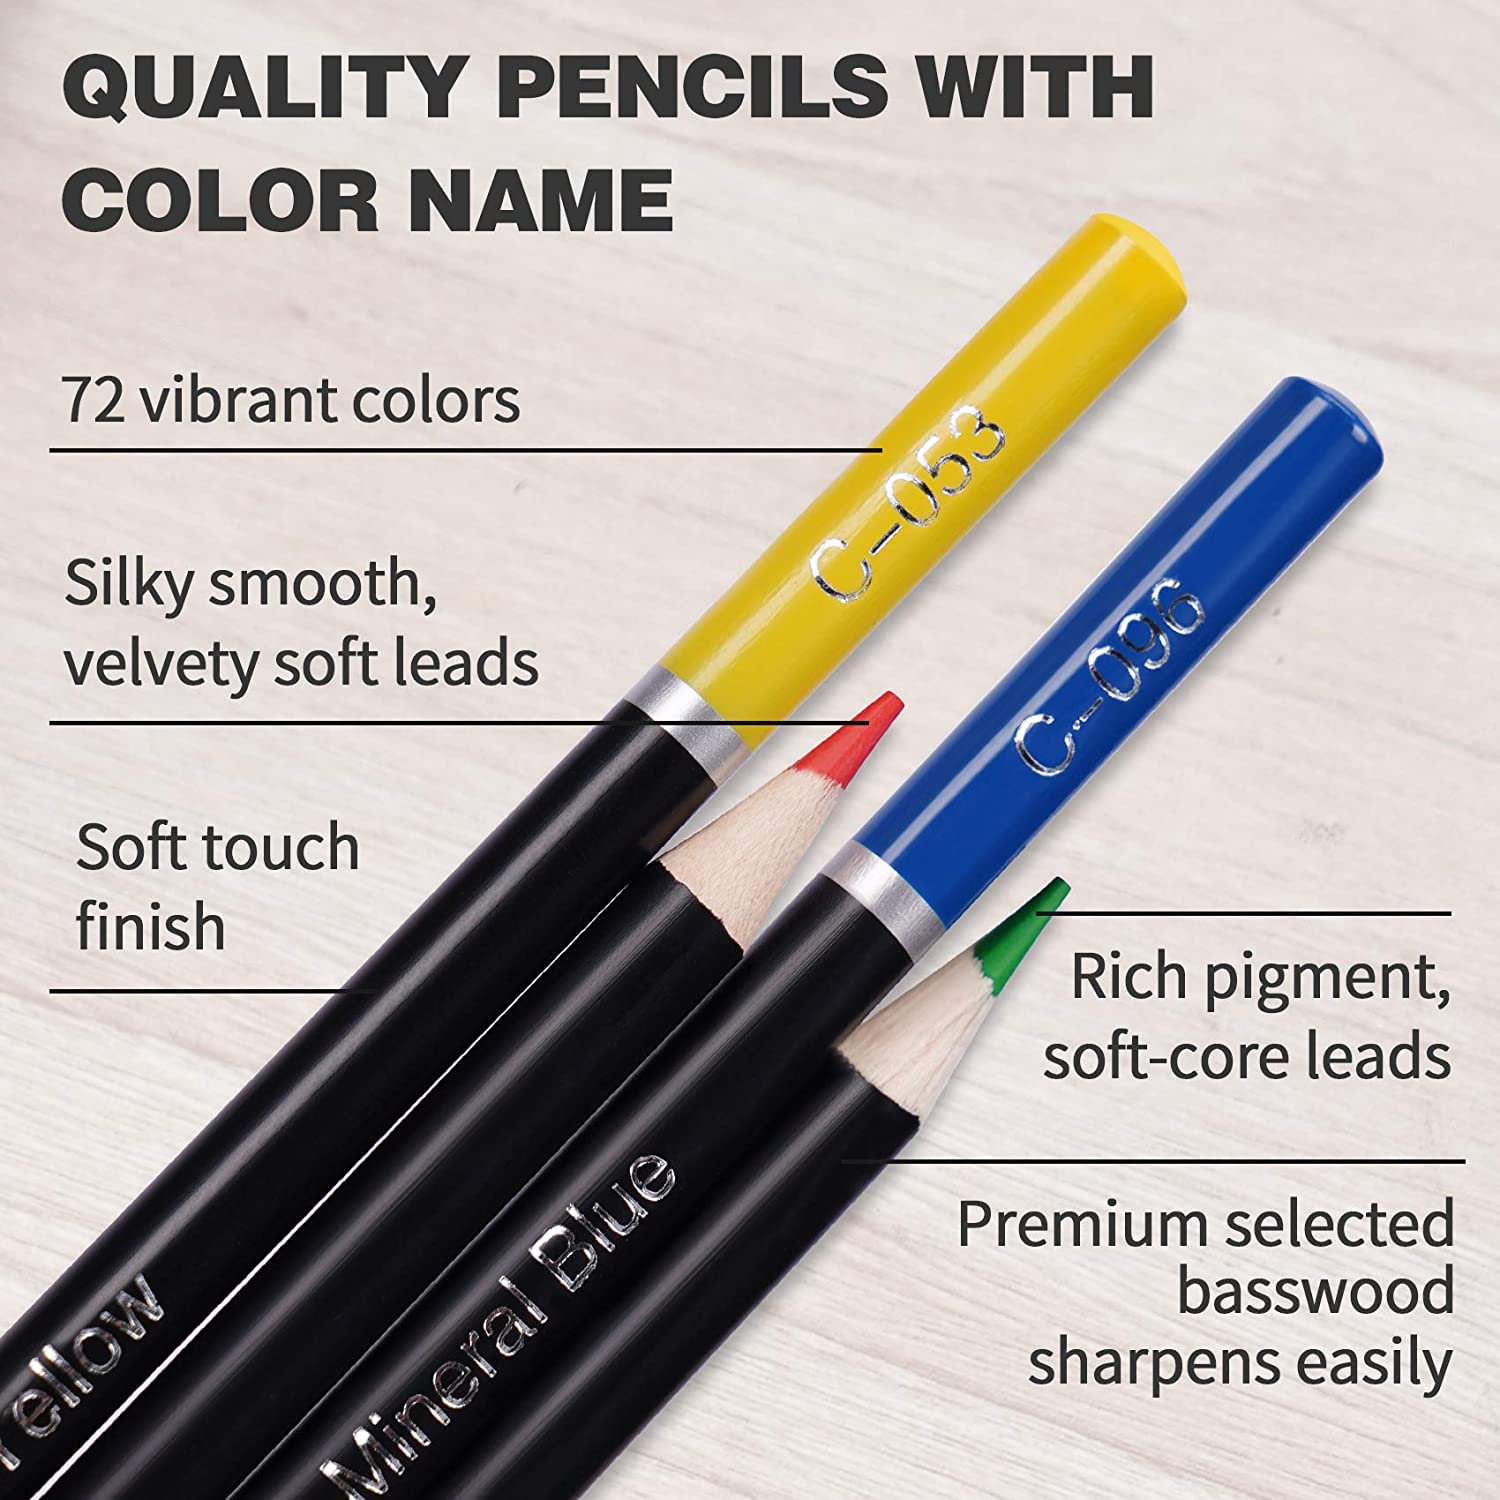 Cool Bank 72 Colored Pencils features